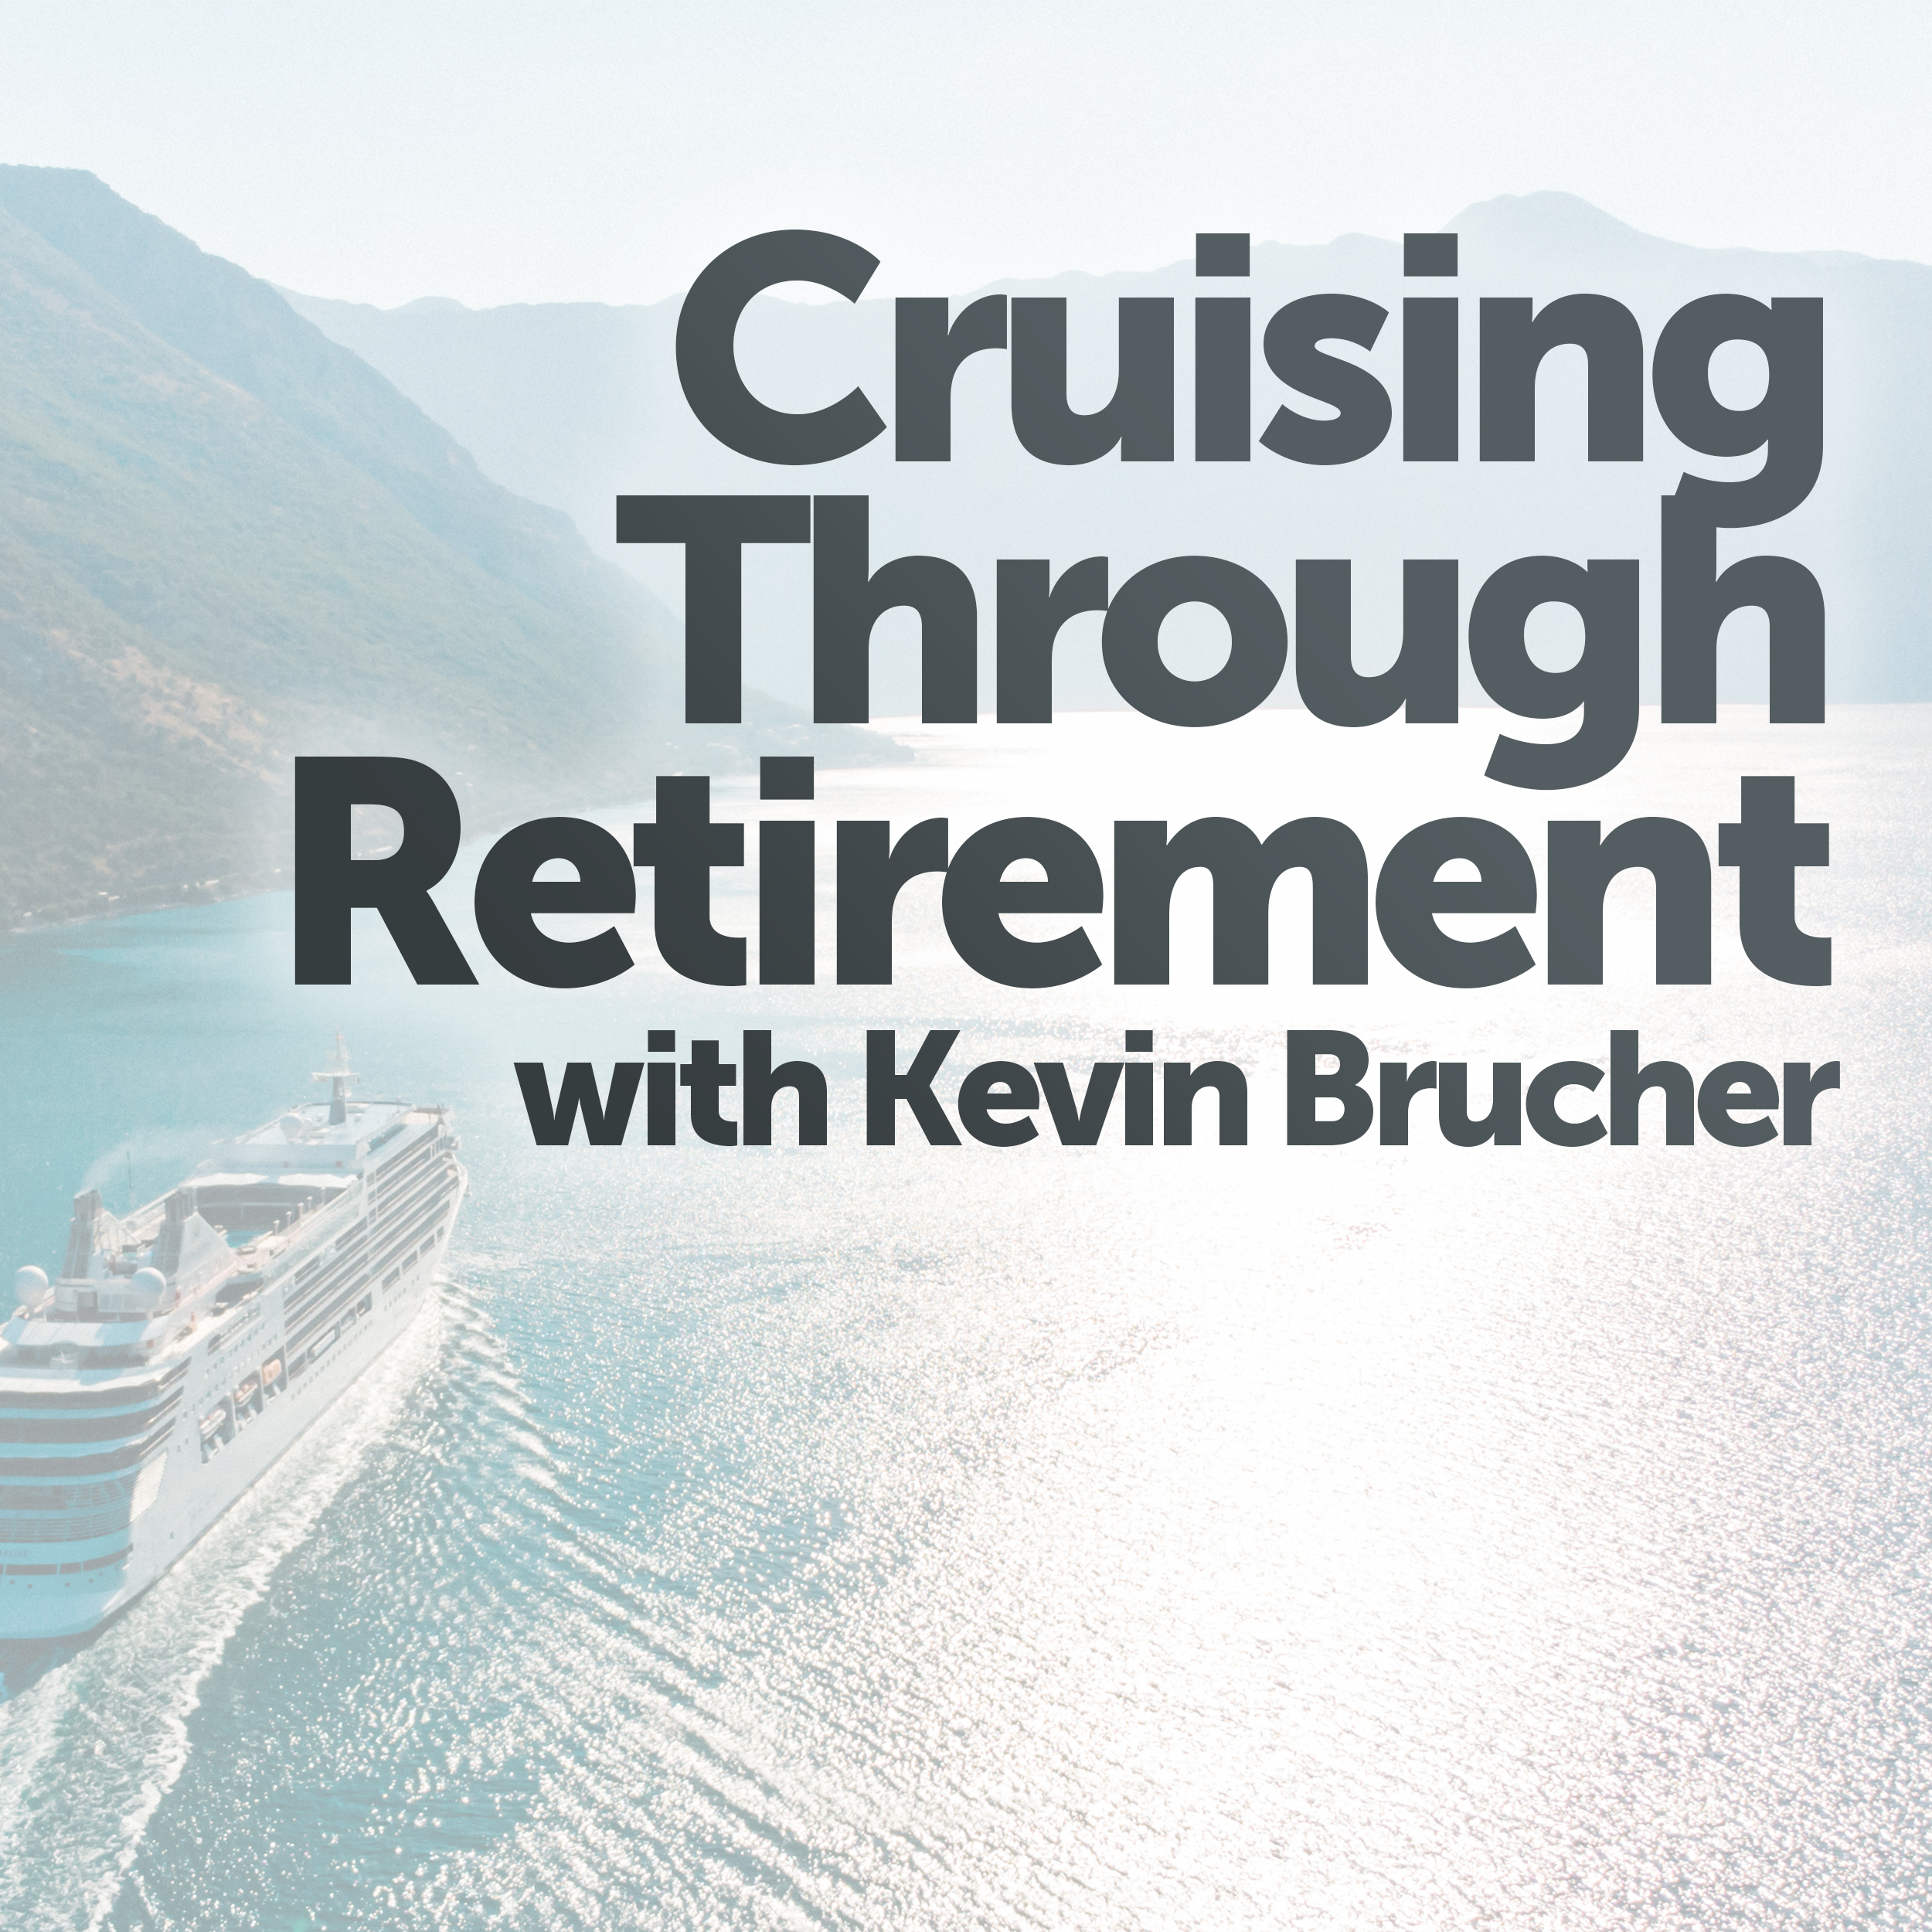 Ep 96 Cruising Through Retirement  This week Kevin Brucher takes a deep dive into cryptocurrency and offers some tips to navigate what is being called the “new wild west”.